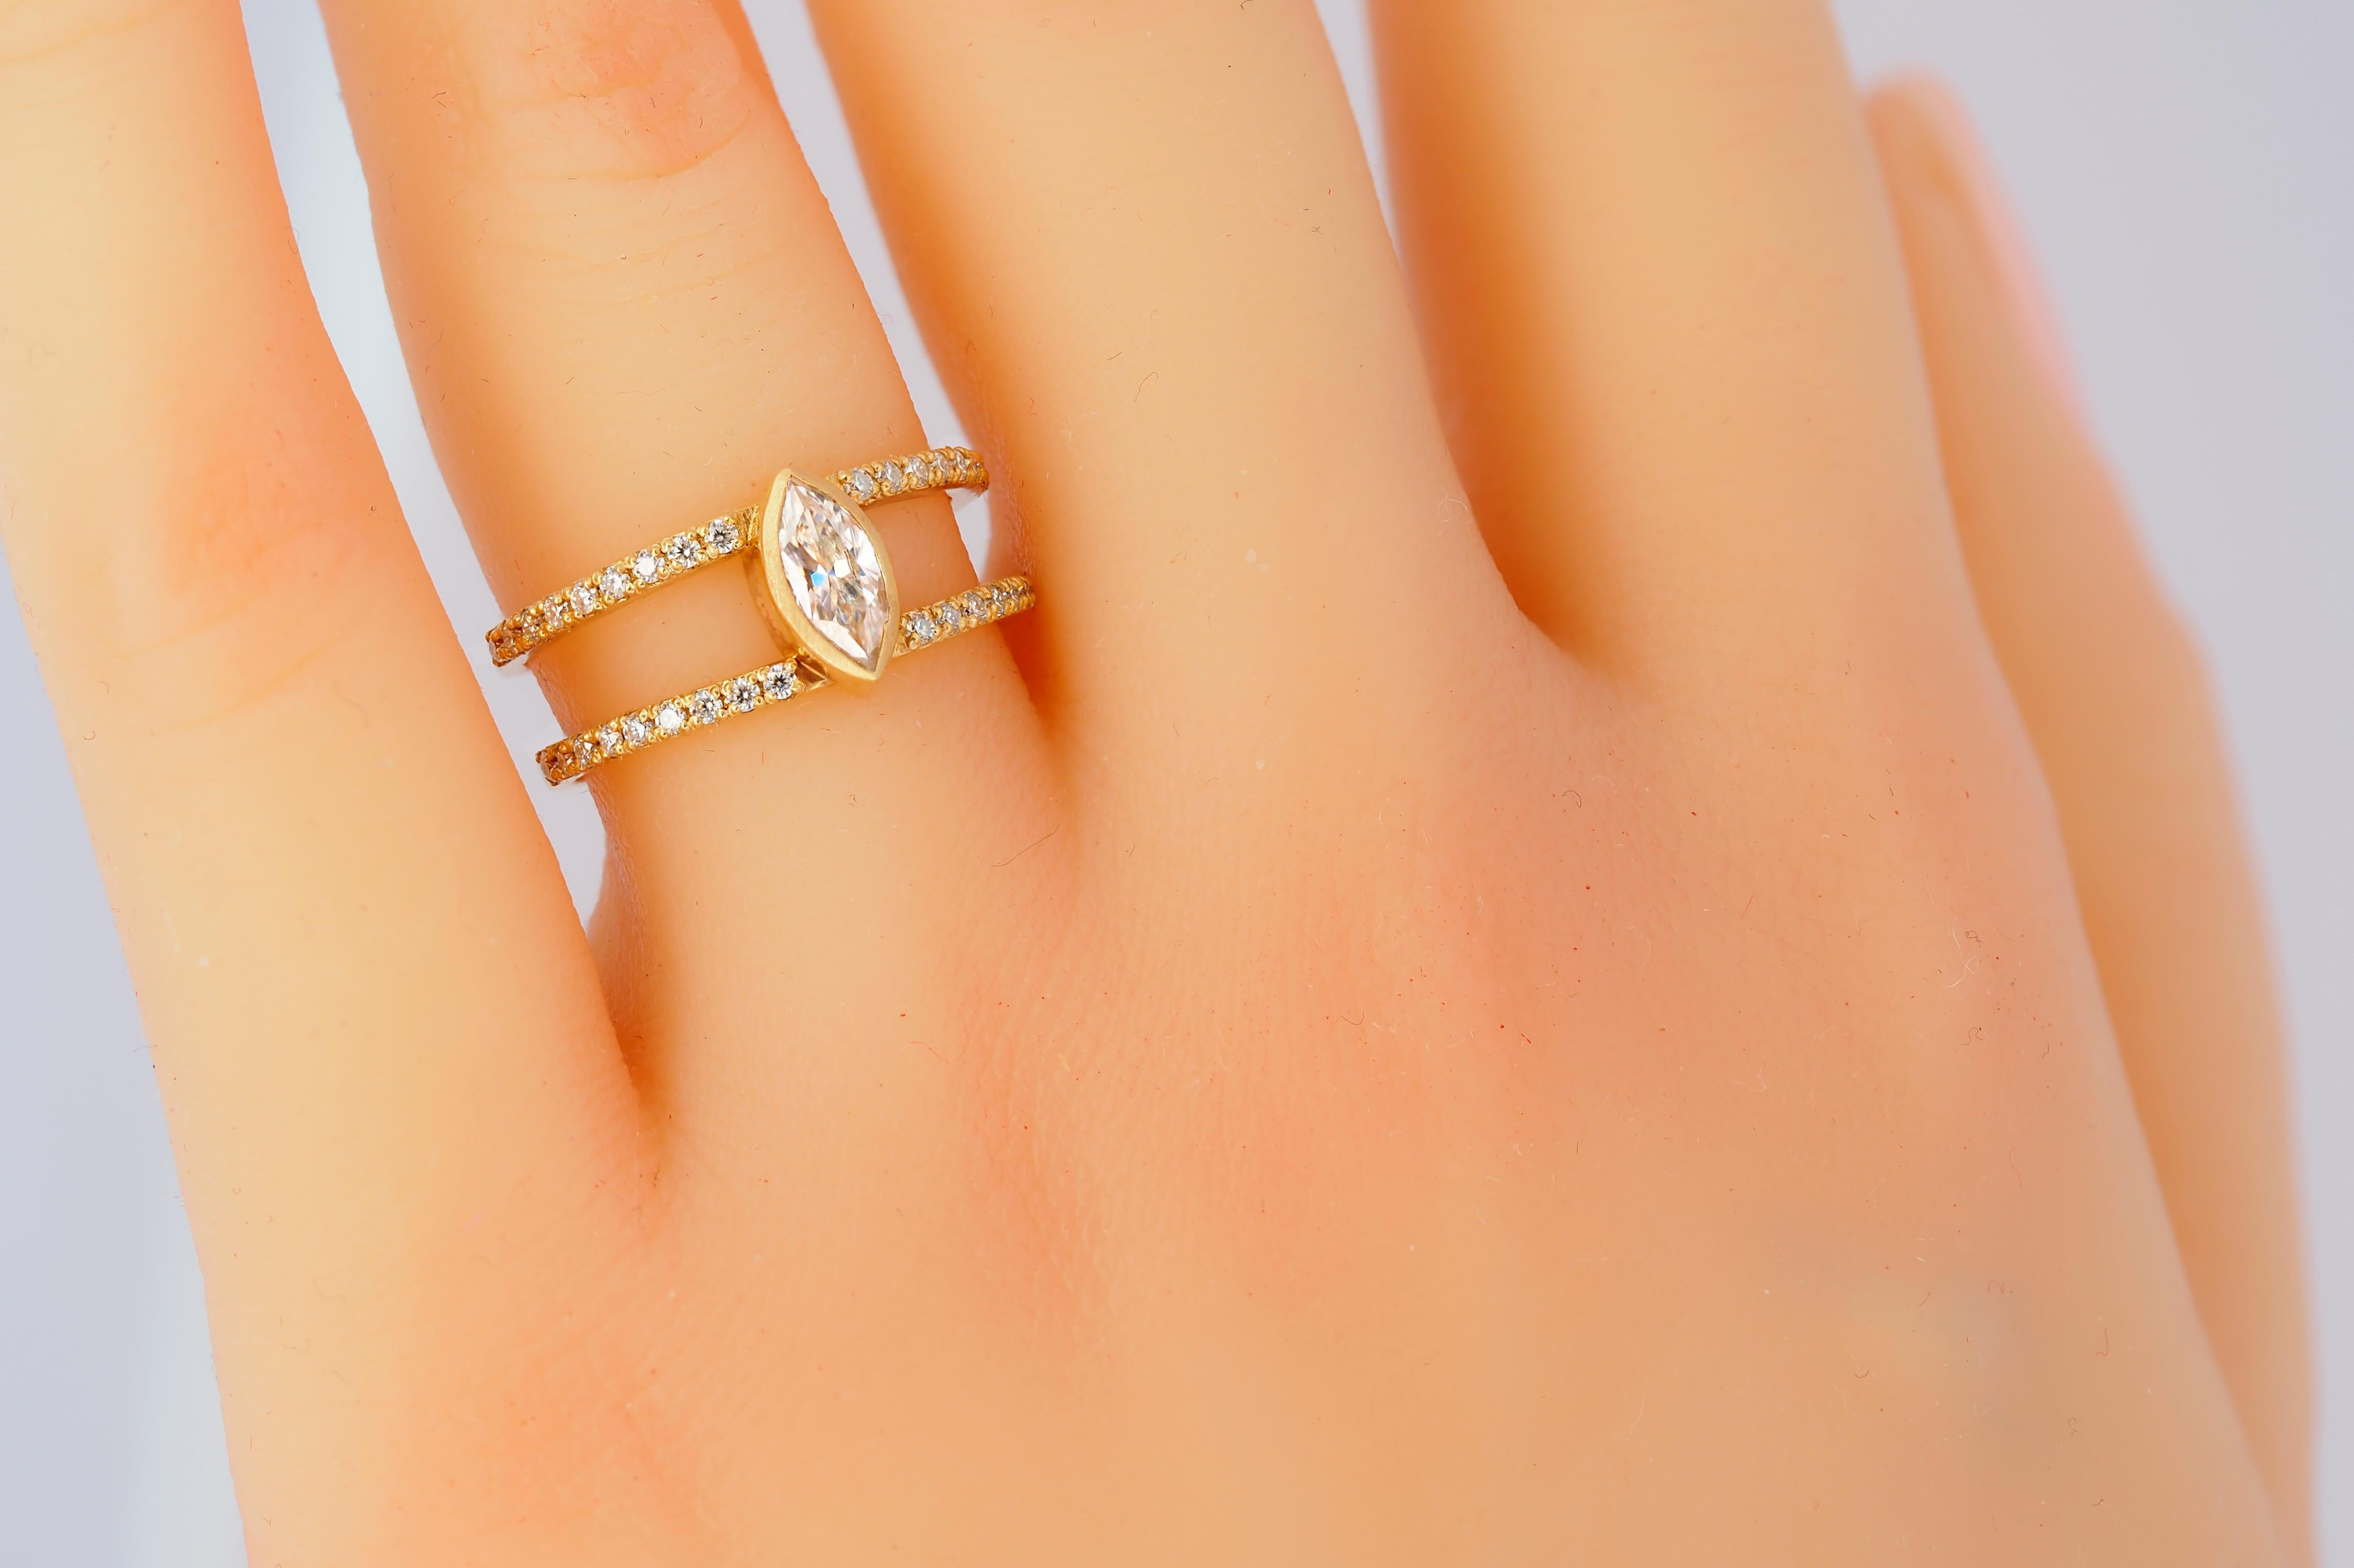 For Sale:  1 ct Marquise moissanite engagement ring in 14k gold.  11